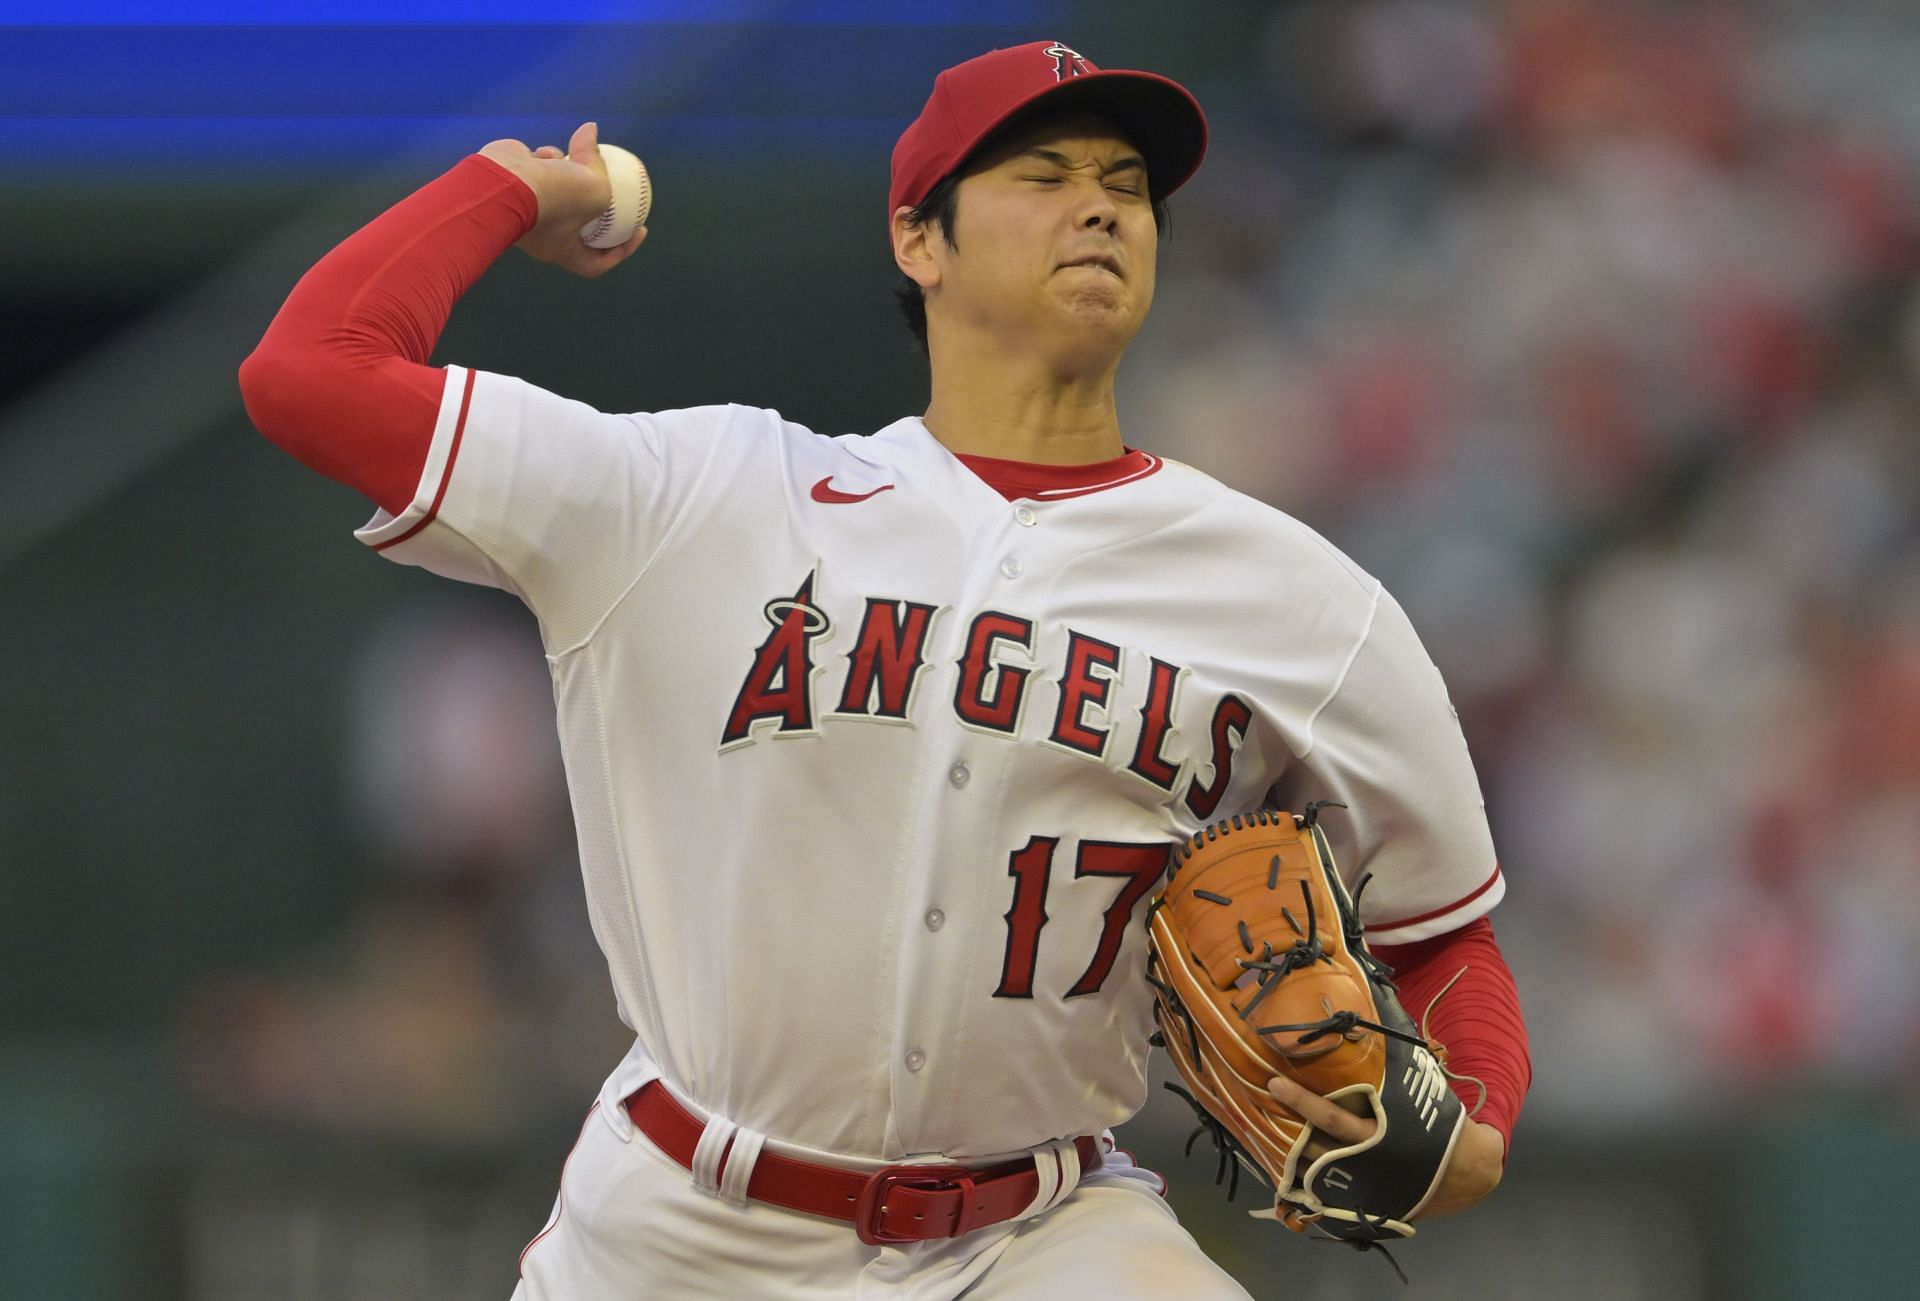 Shohei Ohtani throws to a pitch against the Seattle Mariners at Angel Stadium of Anaheim